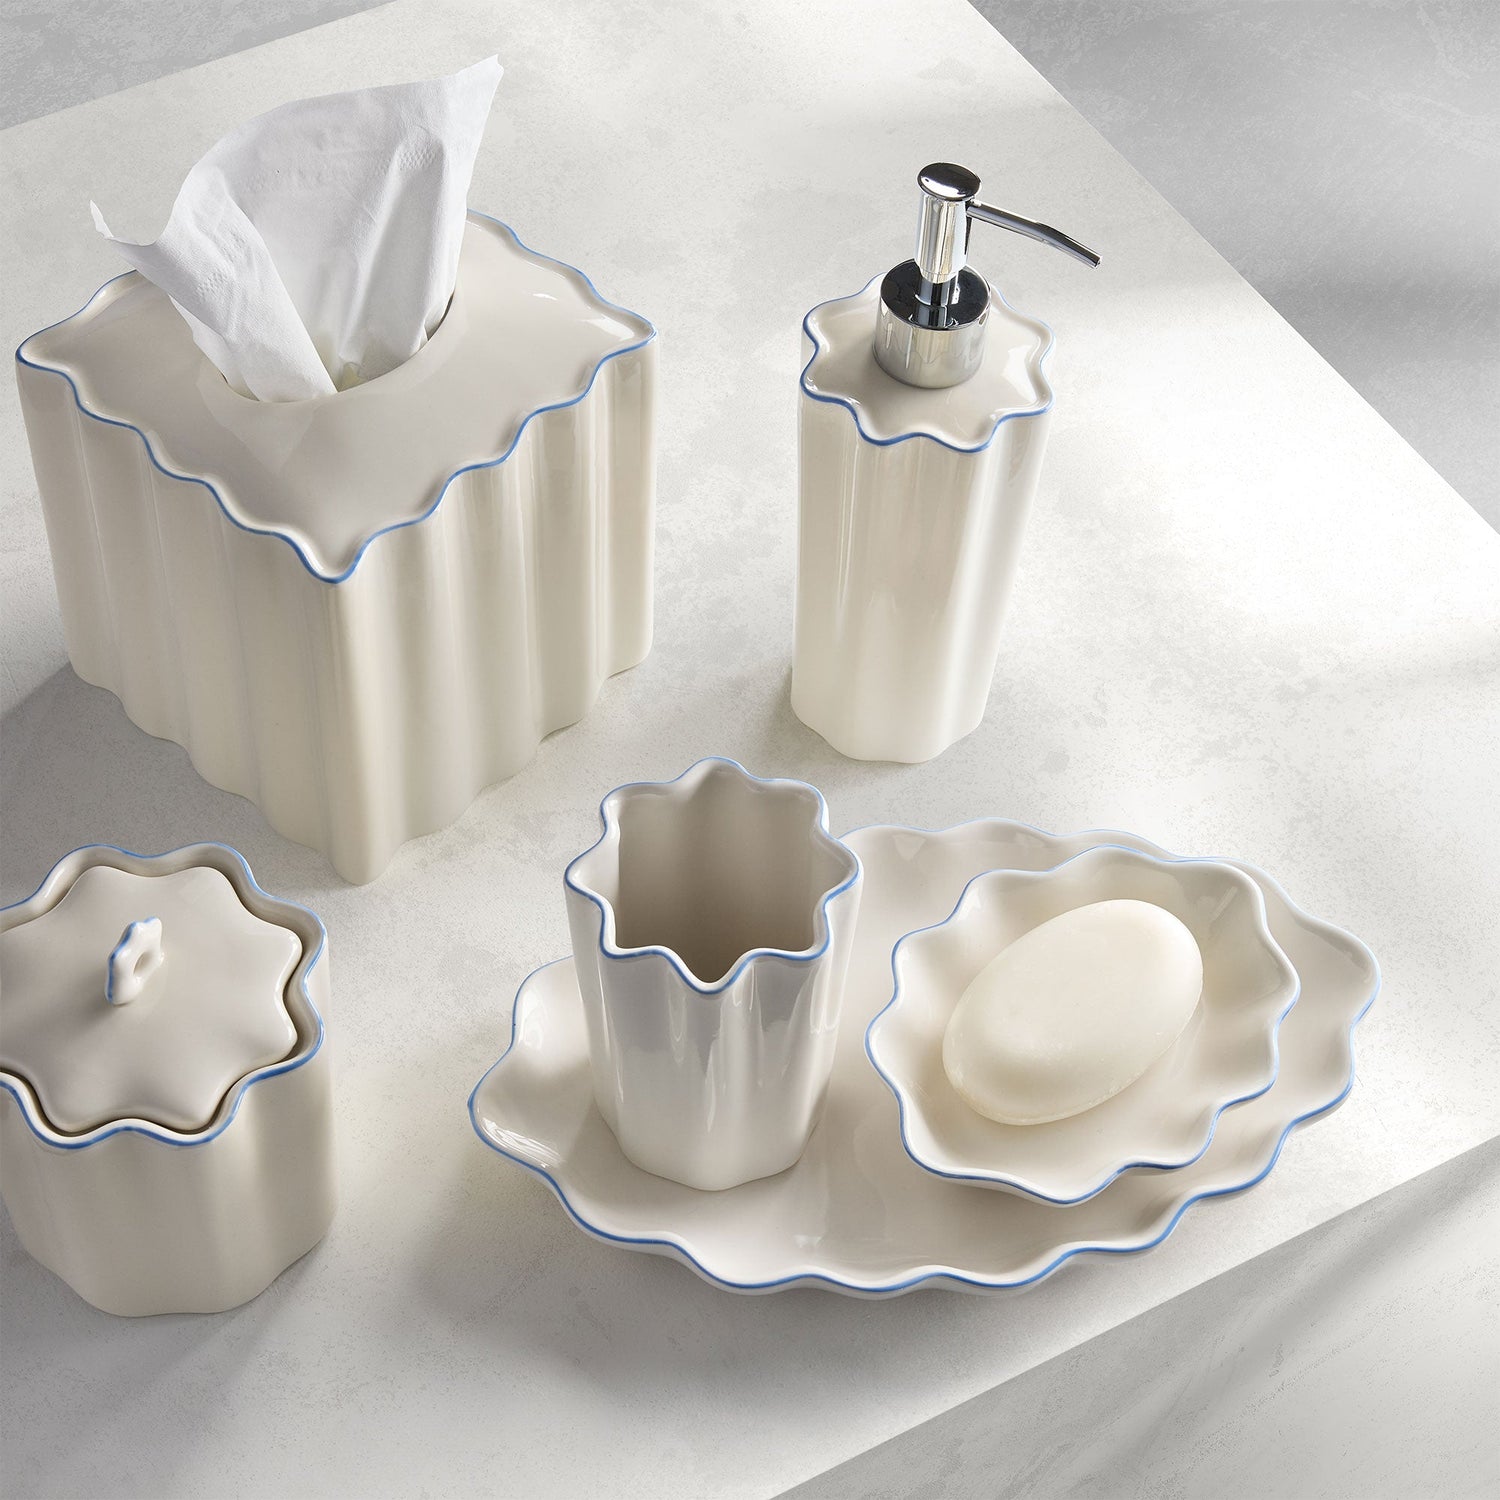 white ceramic tissue holder, cotton jar, lotion dispenser with silver pump, tumbler, and soap dish on top of a tray 